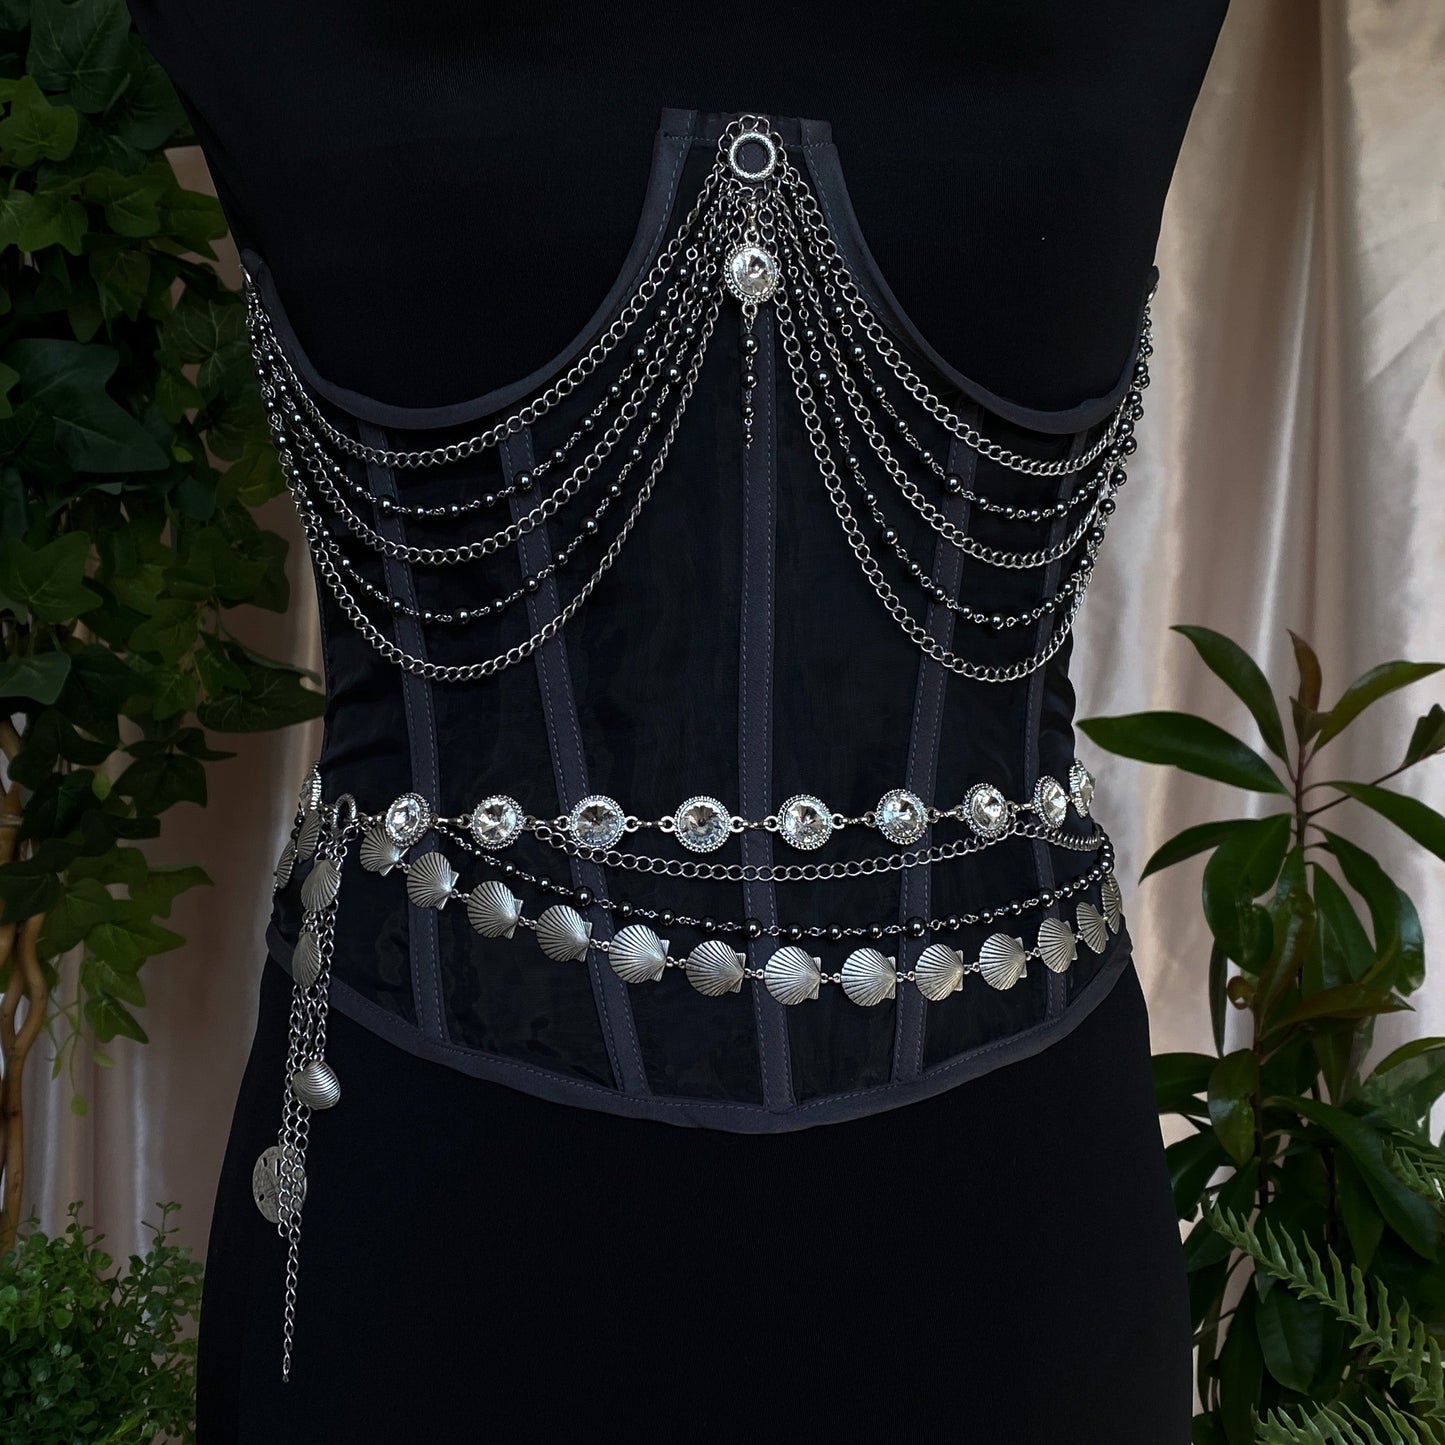 Tara ~ Dark Siren Layered Black Pearl Choker with Glass Pearls, Antique Silver Shells and Stainless Steel